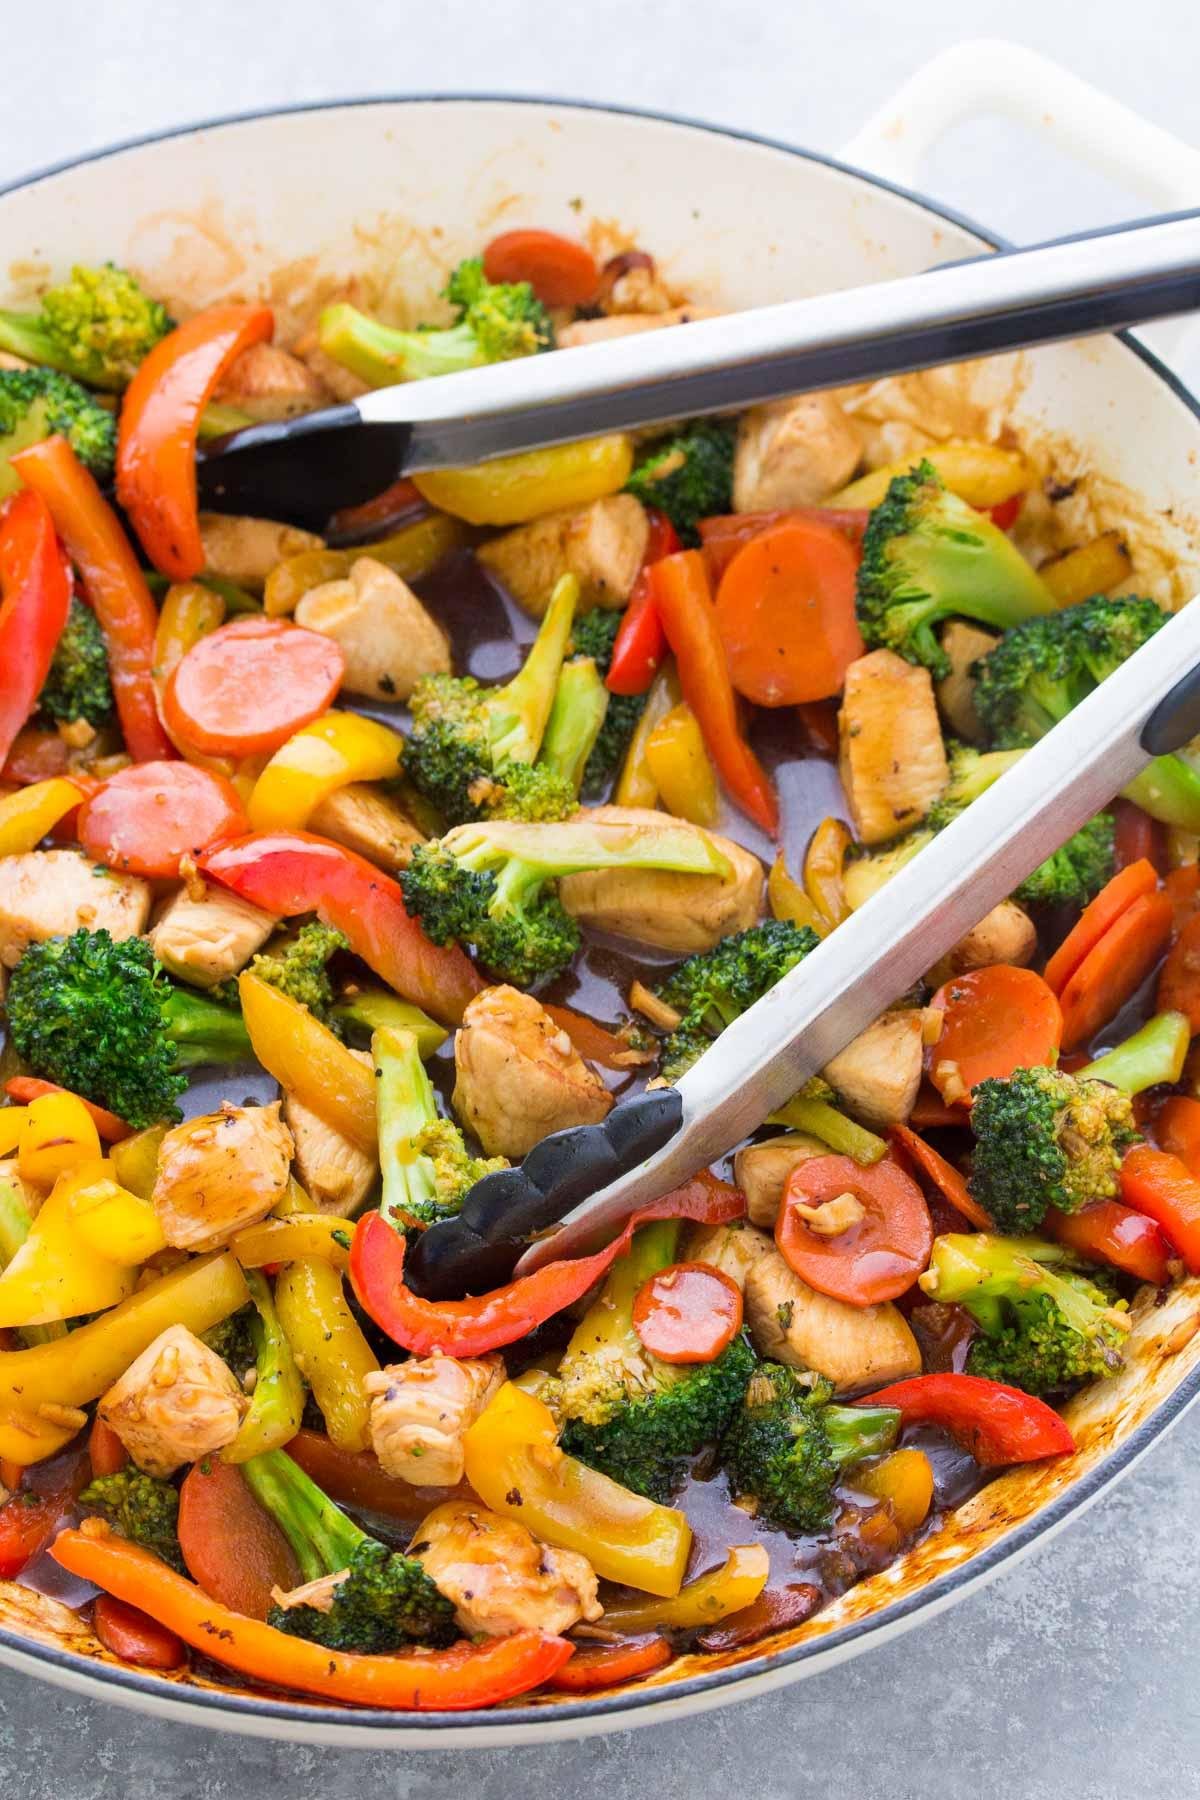 5-Minute Meal: Easy & Delicious One-Pan Chicken and Veggie Stir-Fry